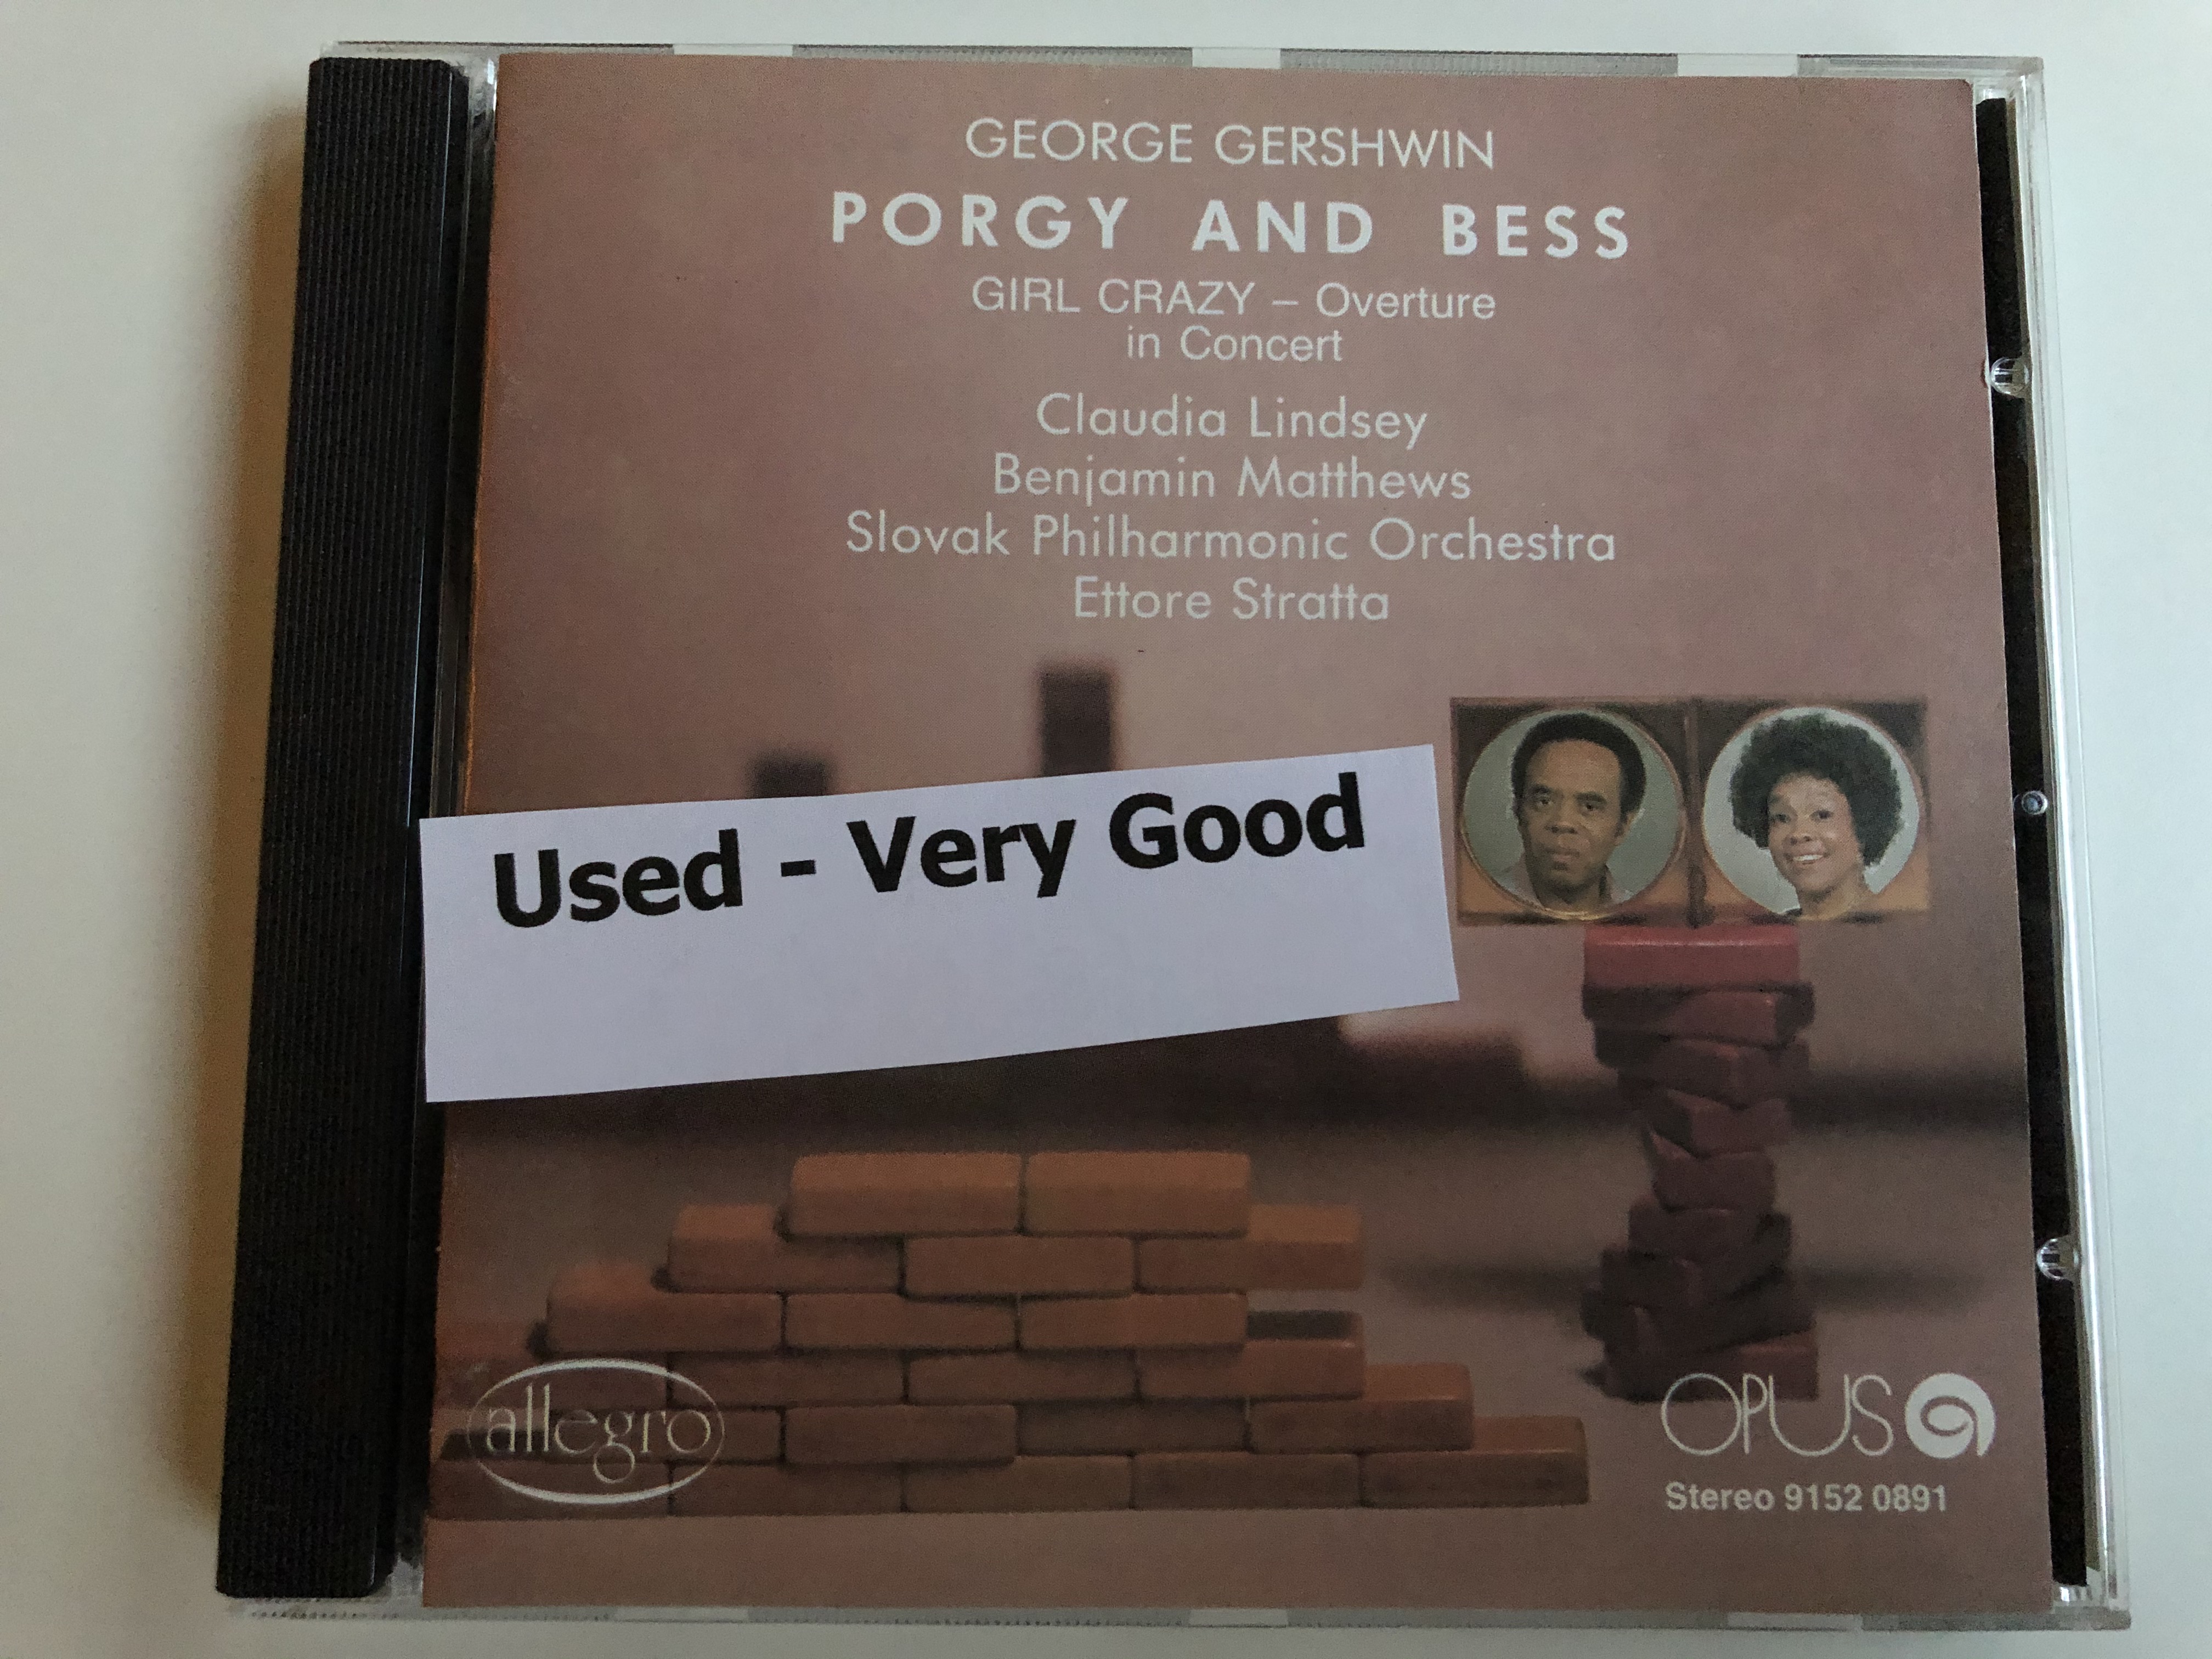 george-gershwin-porgy-and-bess-girl-crazy-overture-in-concert-claudia-lindsey-benjamin-matthews-slovak-philharmonic-orchestra-conducted-ettore-stratta-opus-audio-cd-1981-stereo-9112-089-1-.jpg